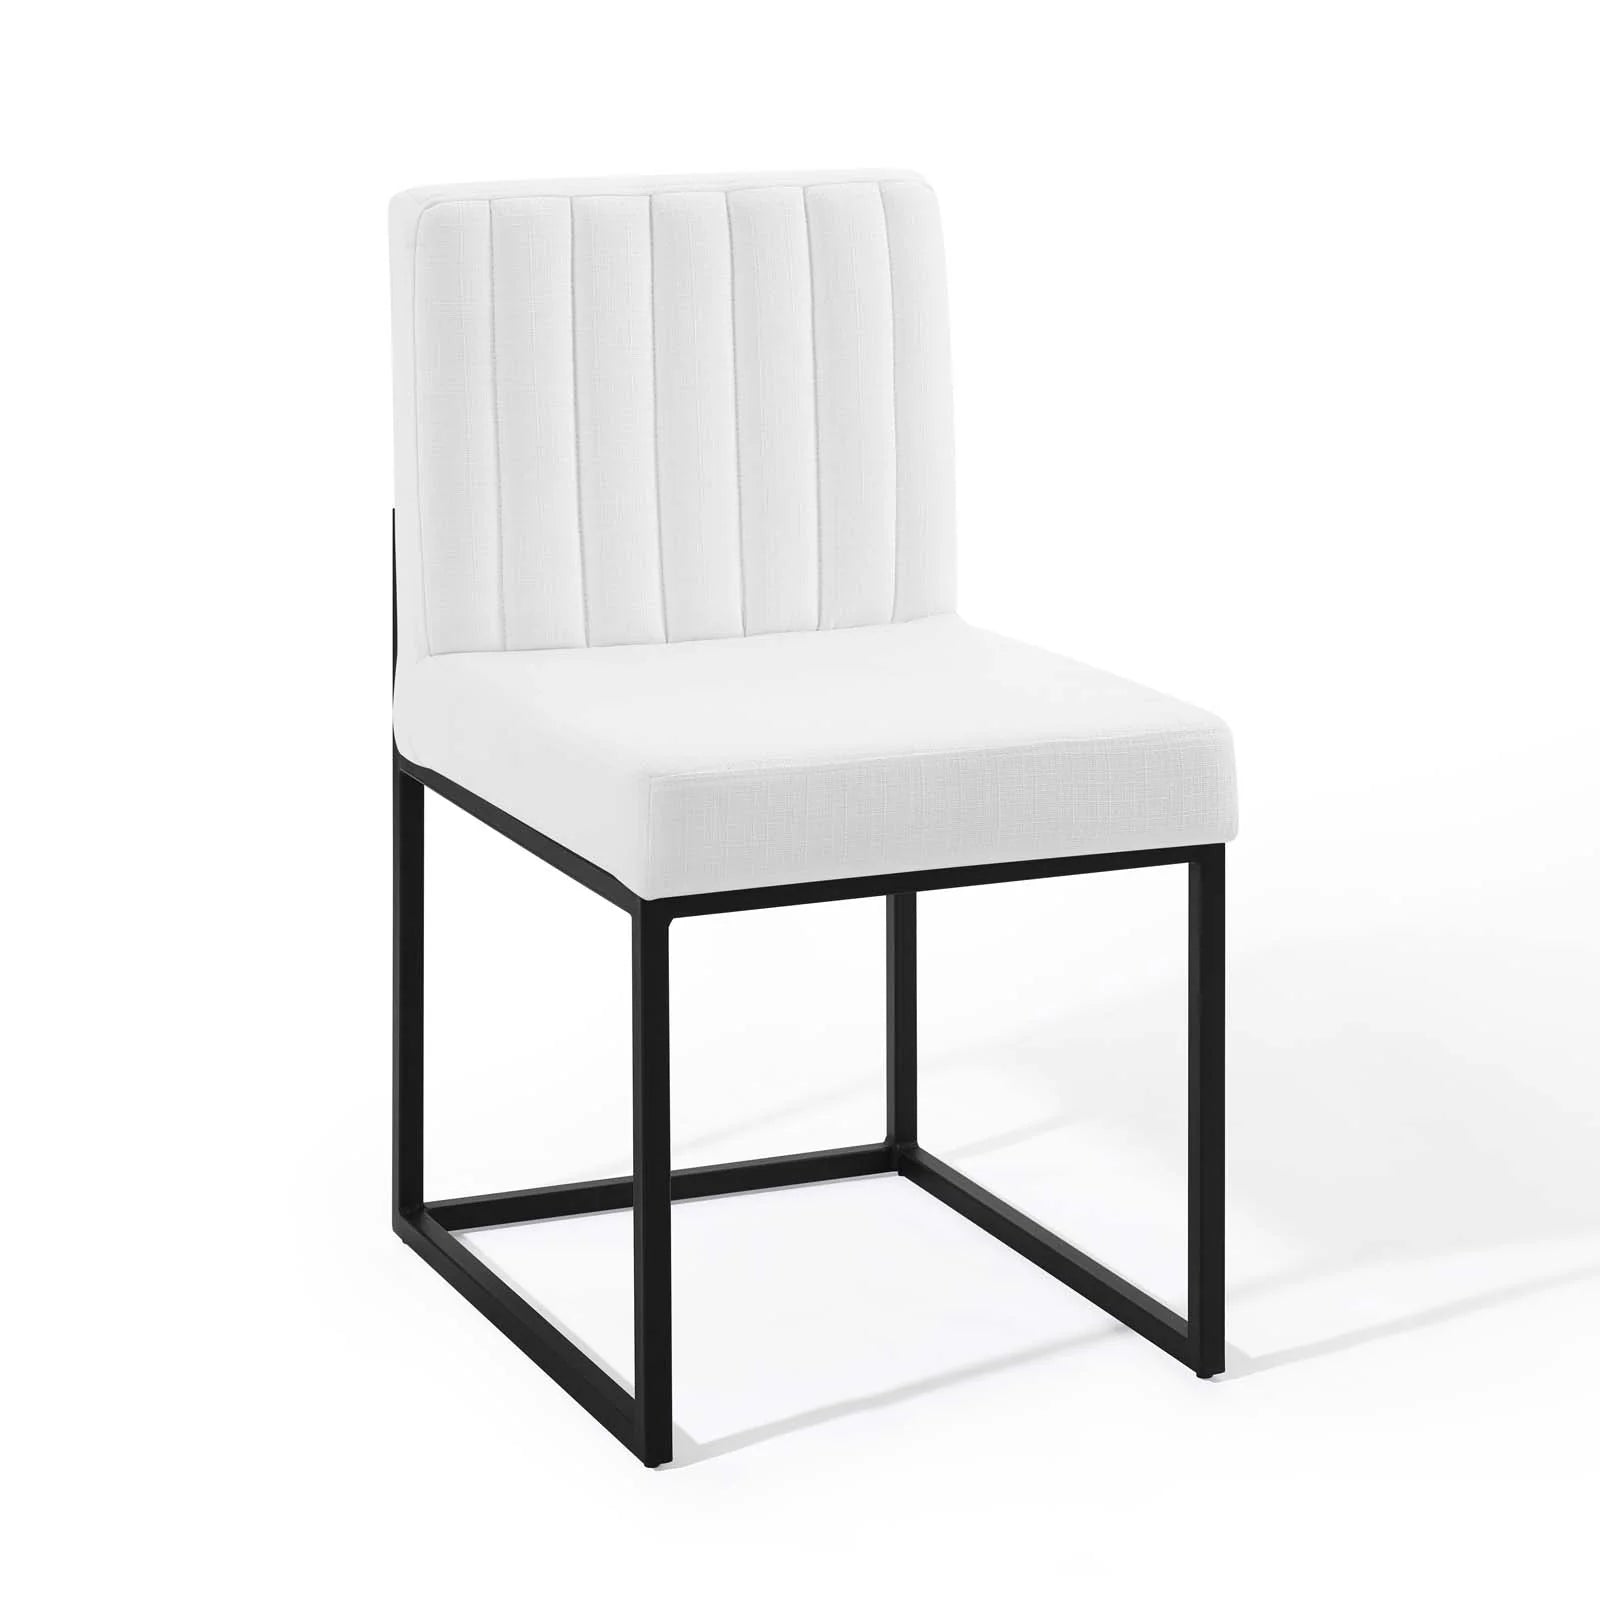 Carriage Fabric Dining Chair- White